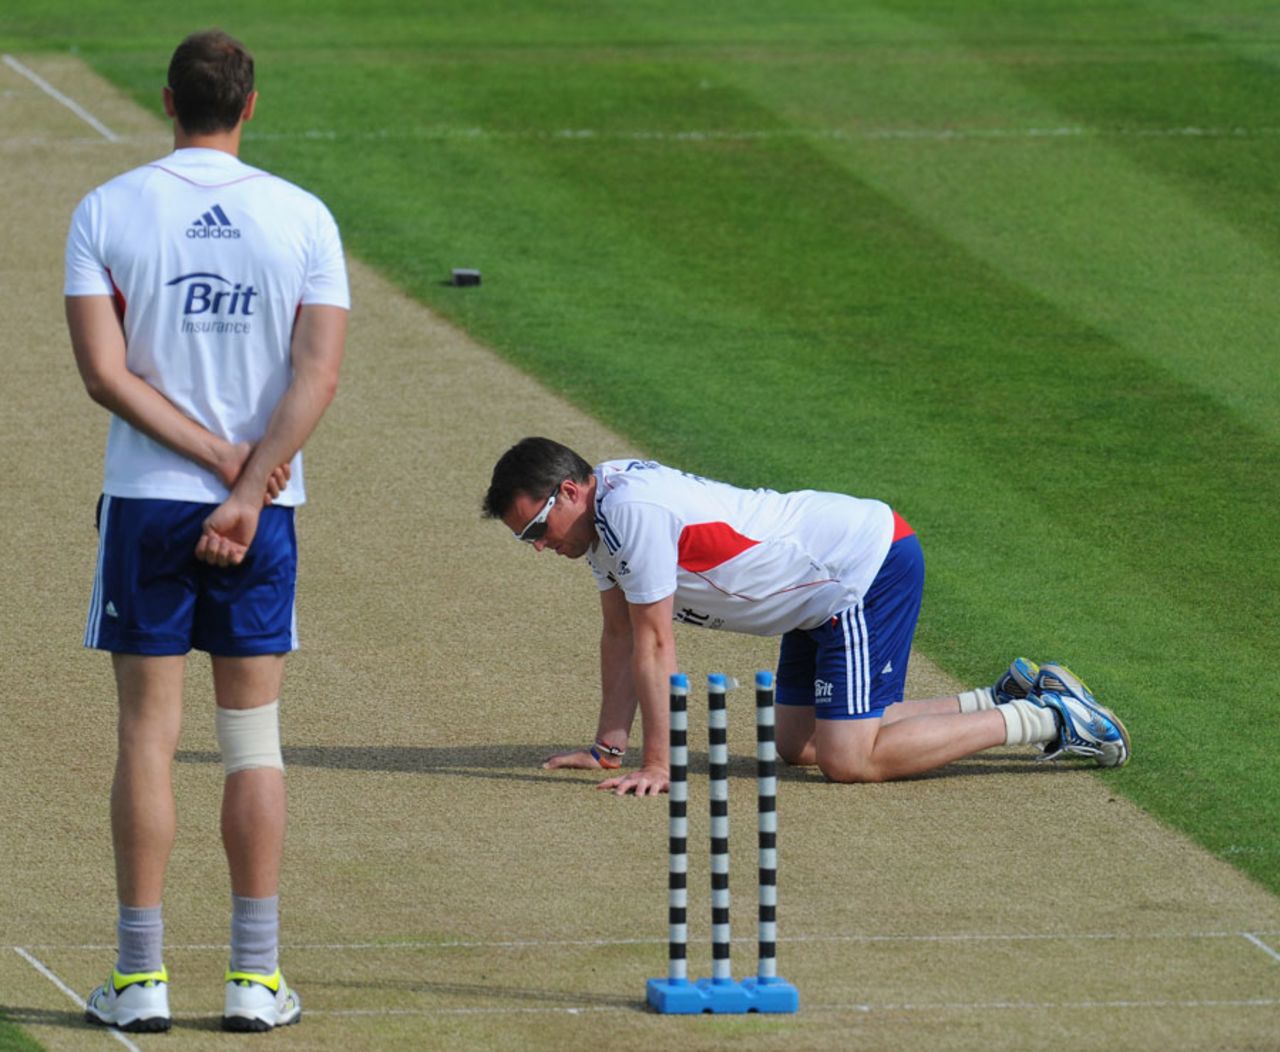 Graeme Swann has a good look at the pitch, Chester-le-Street, August 8, 2013